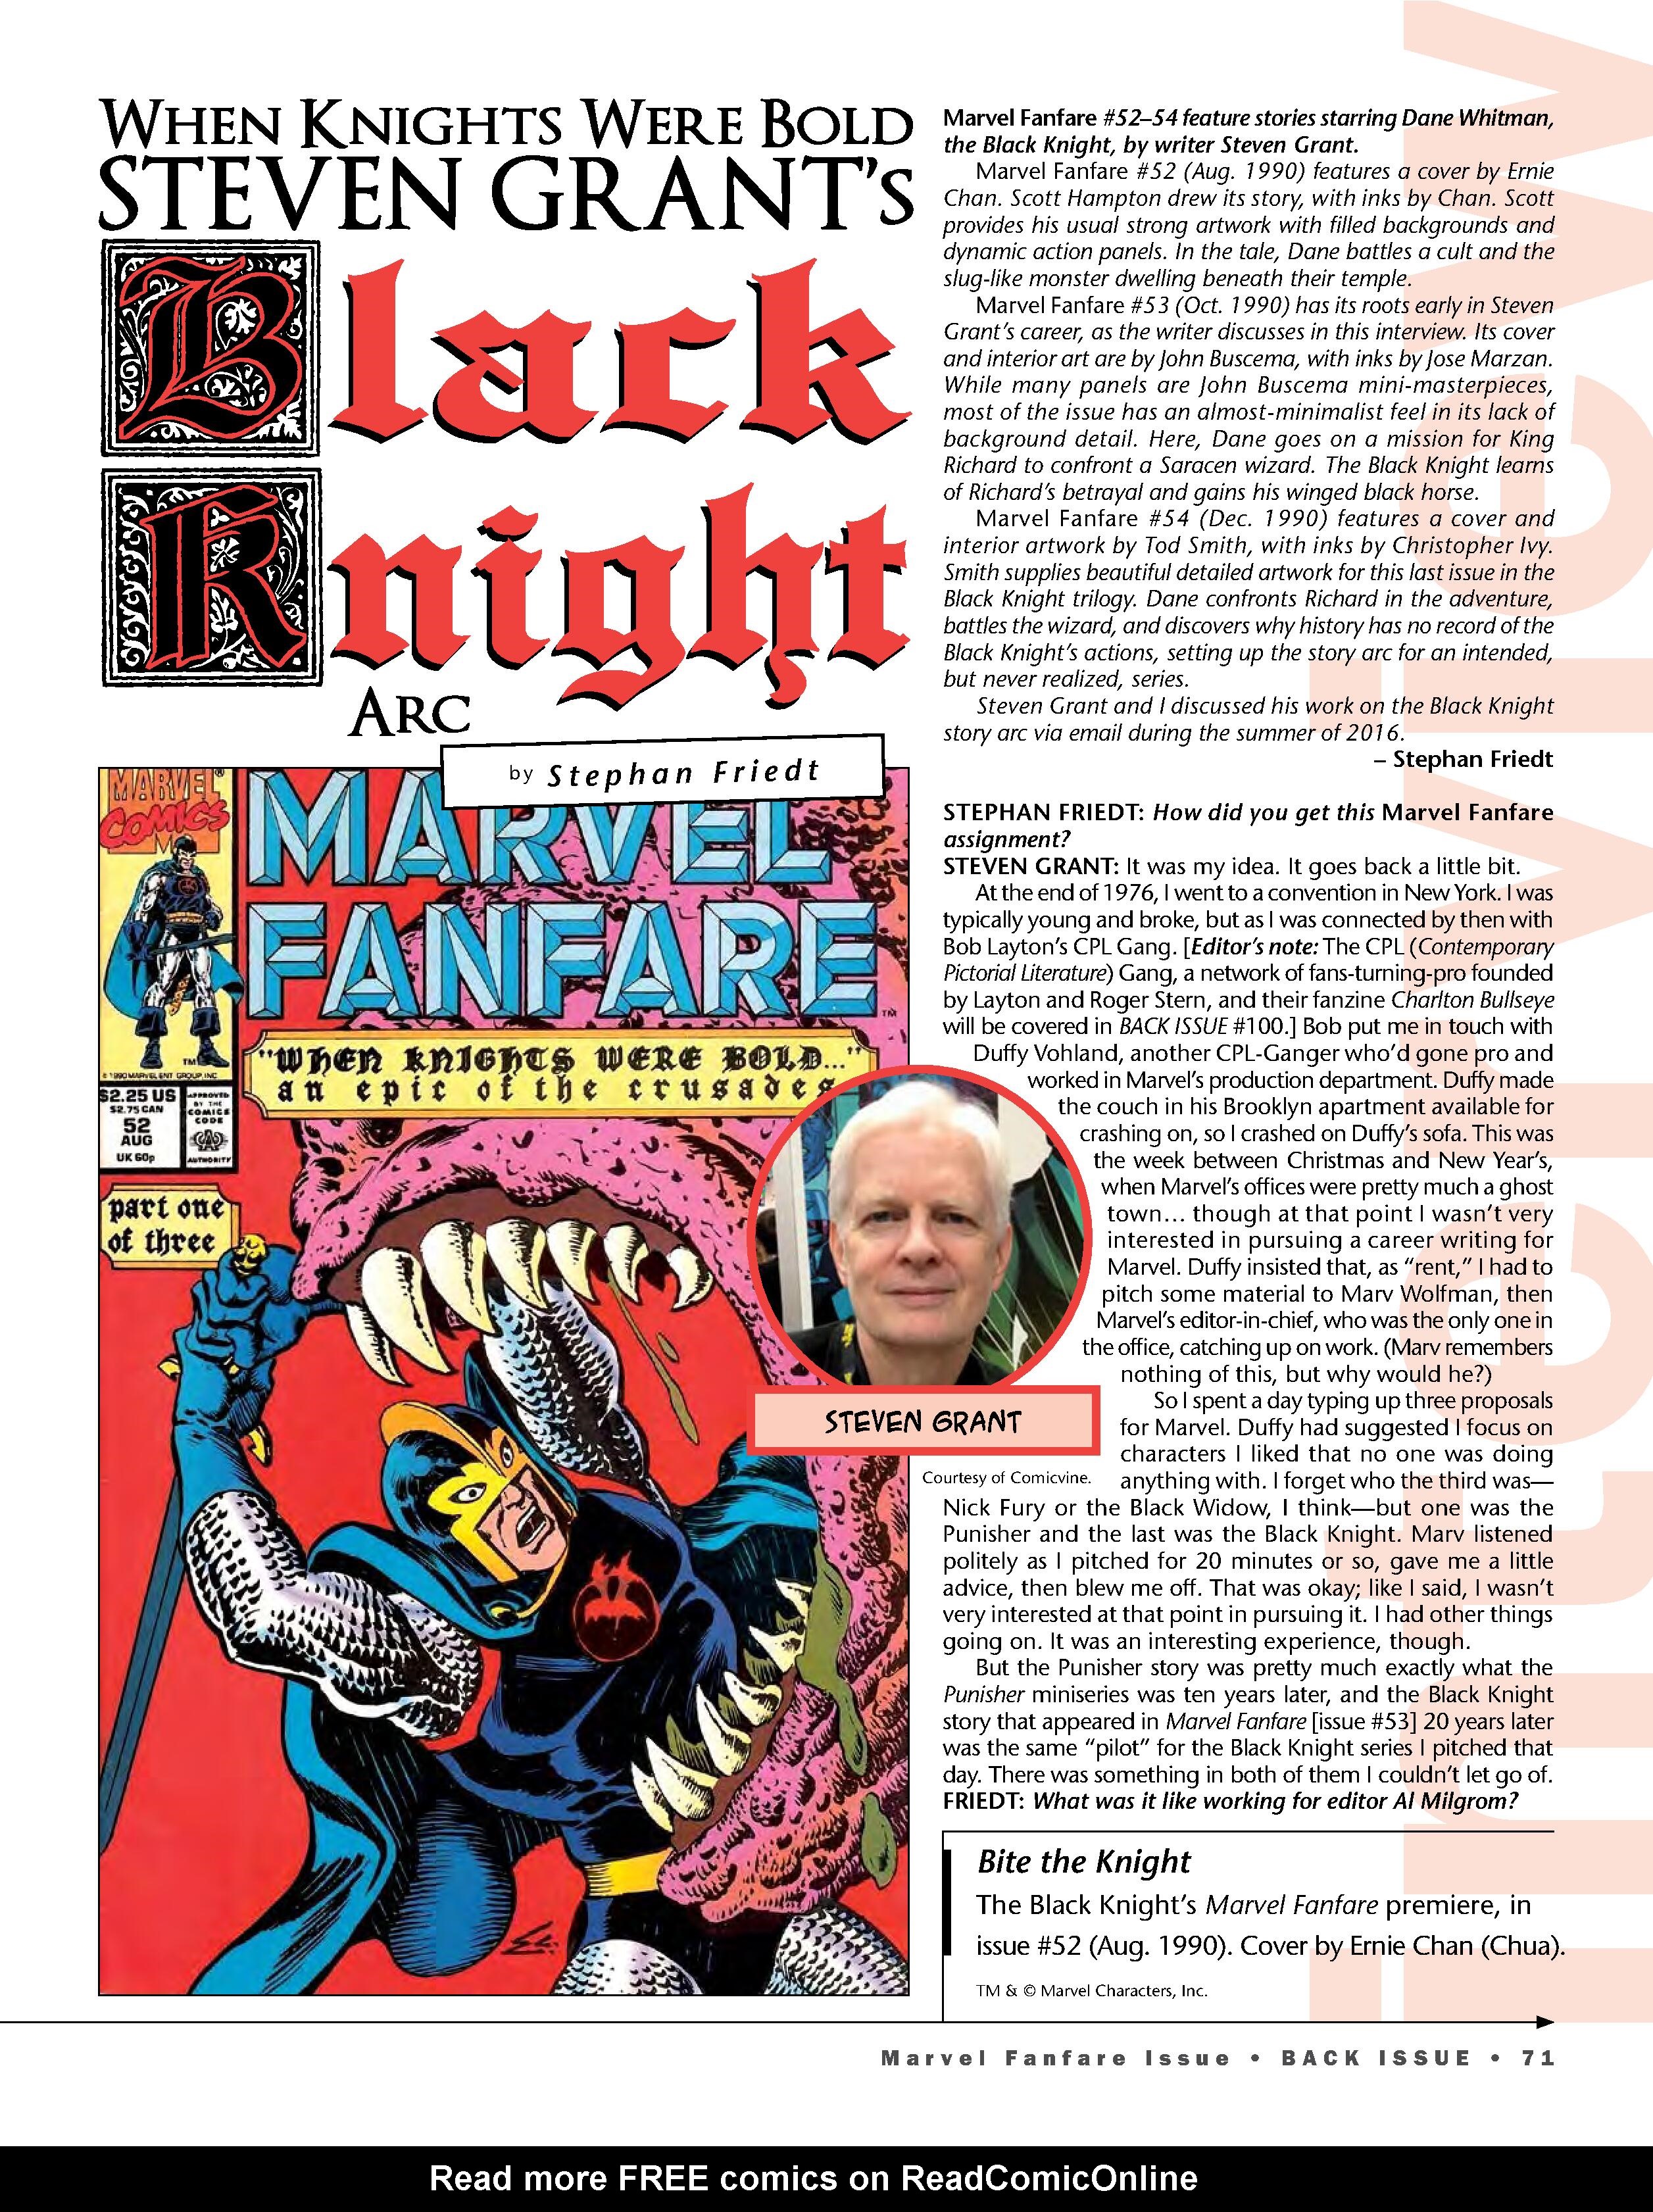 Read online Back Issue comic -  Issue #96 - 73